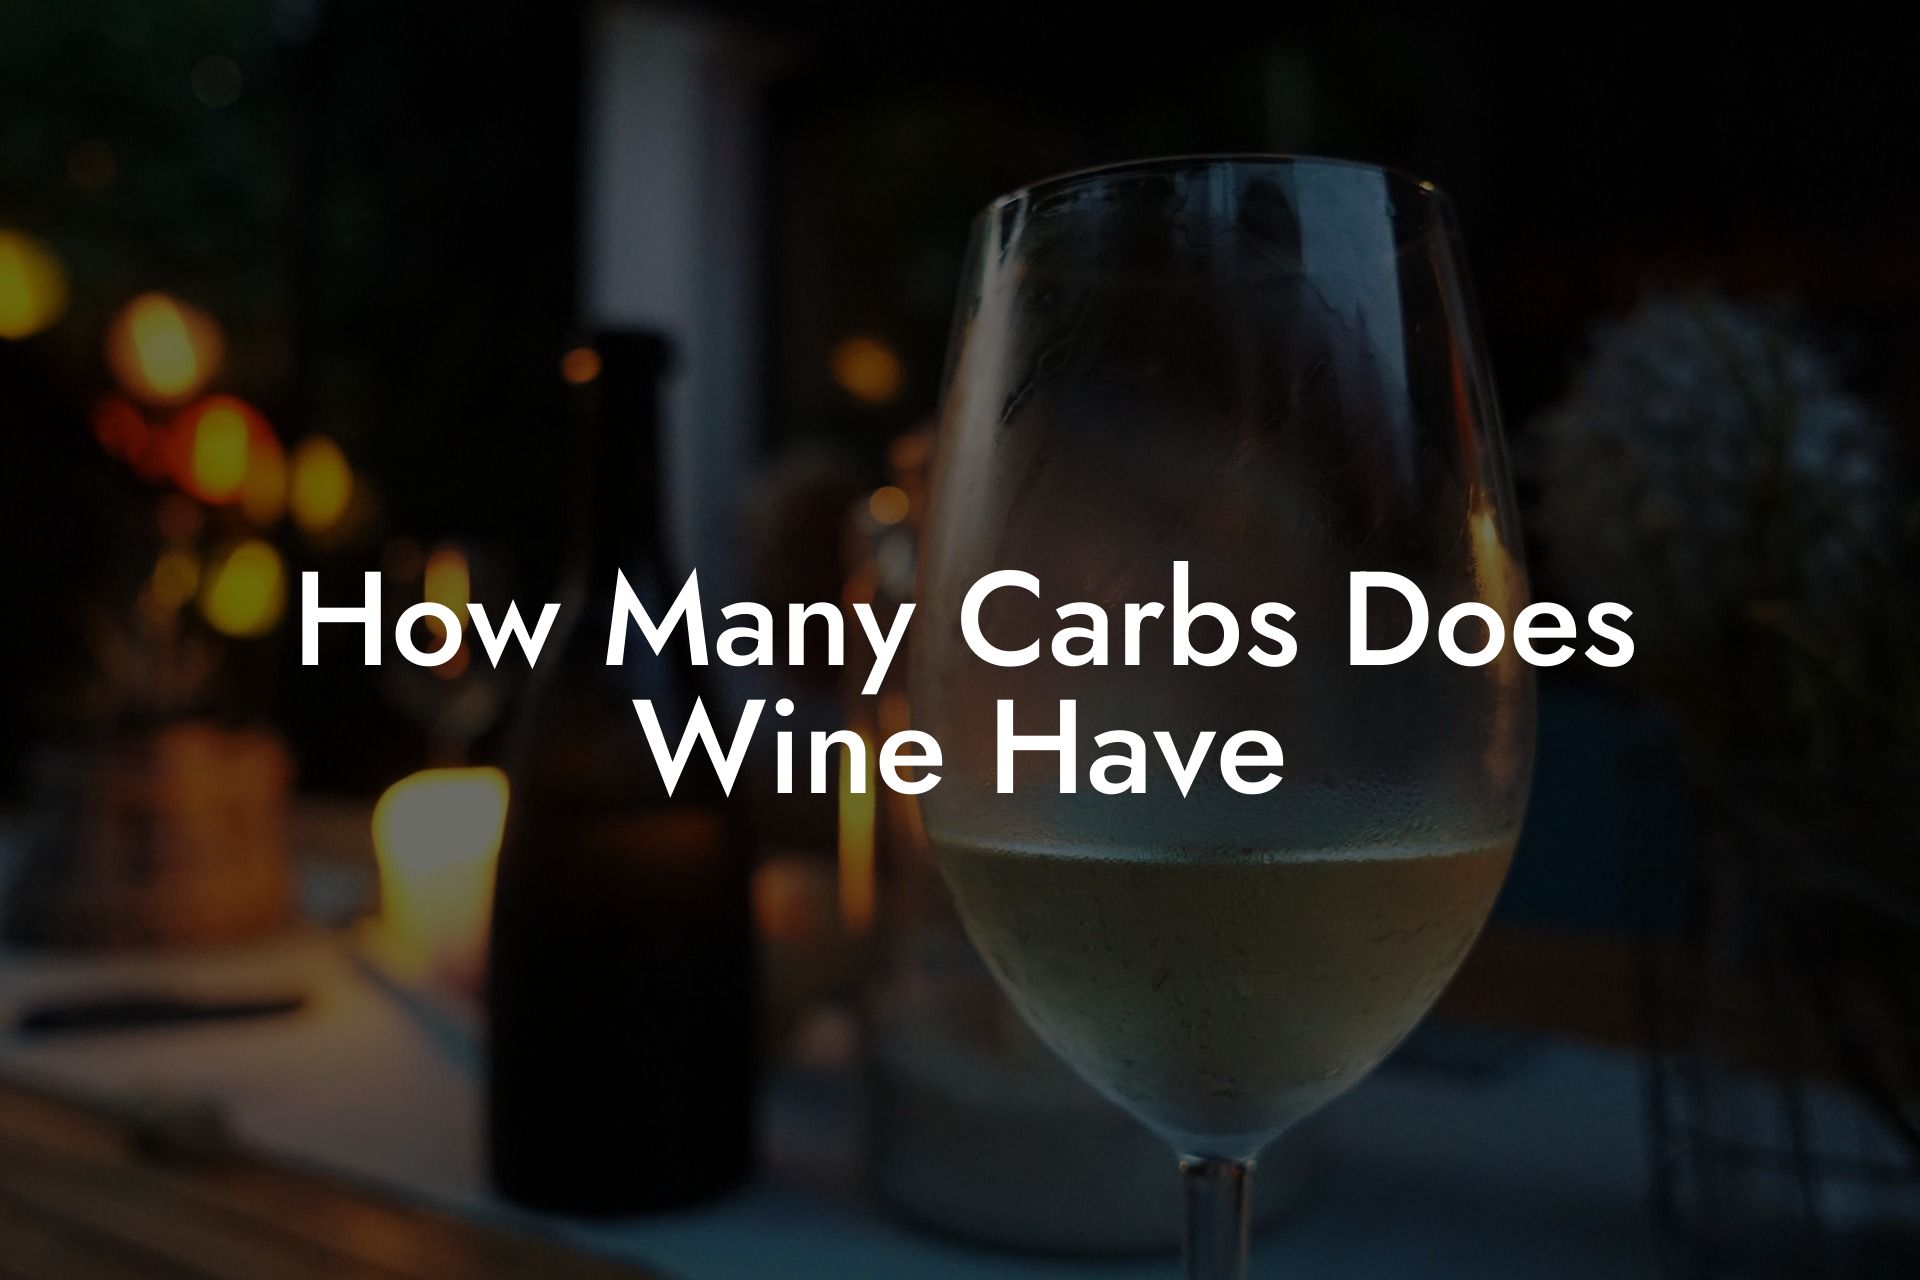 How Many Carbs Does Wine Have